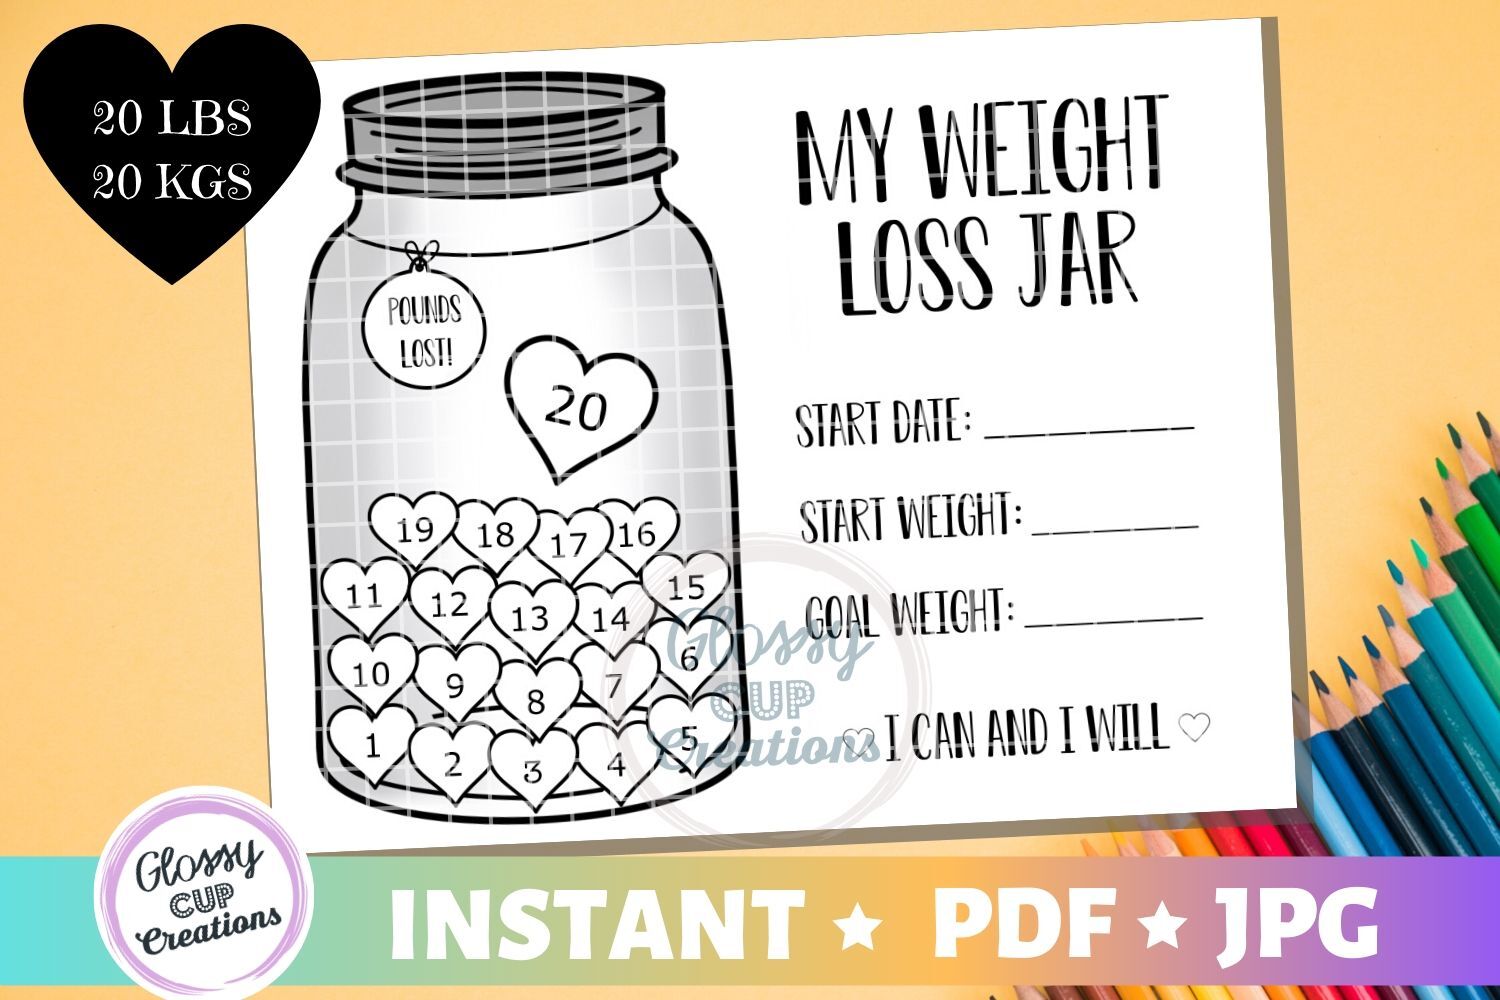 My Weight Loss Jar 20 lbs, JPG, PDF, Printable Coloring Page! By Glossy